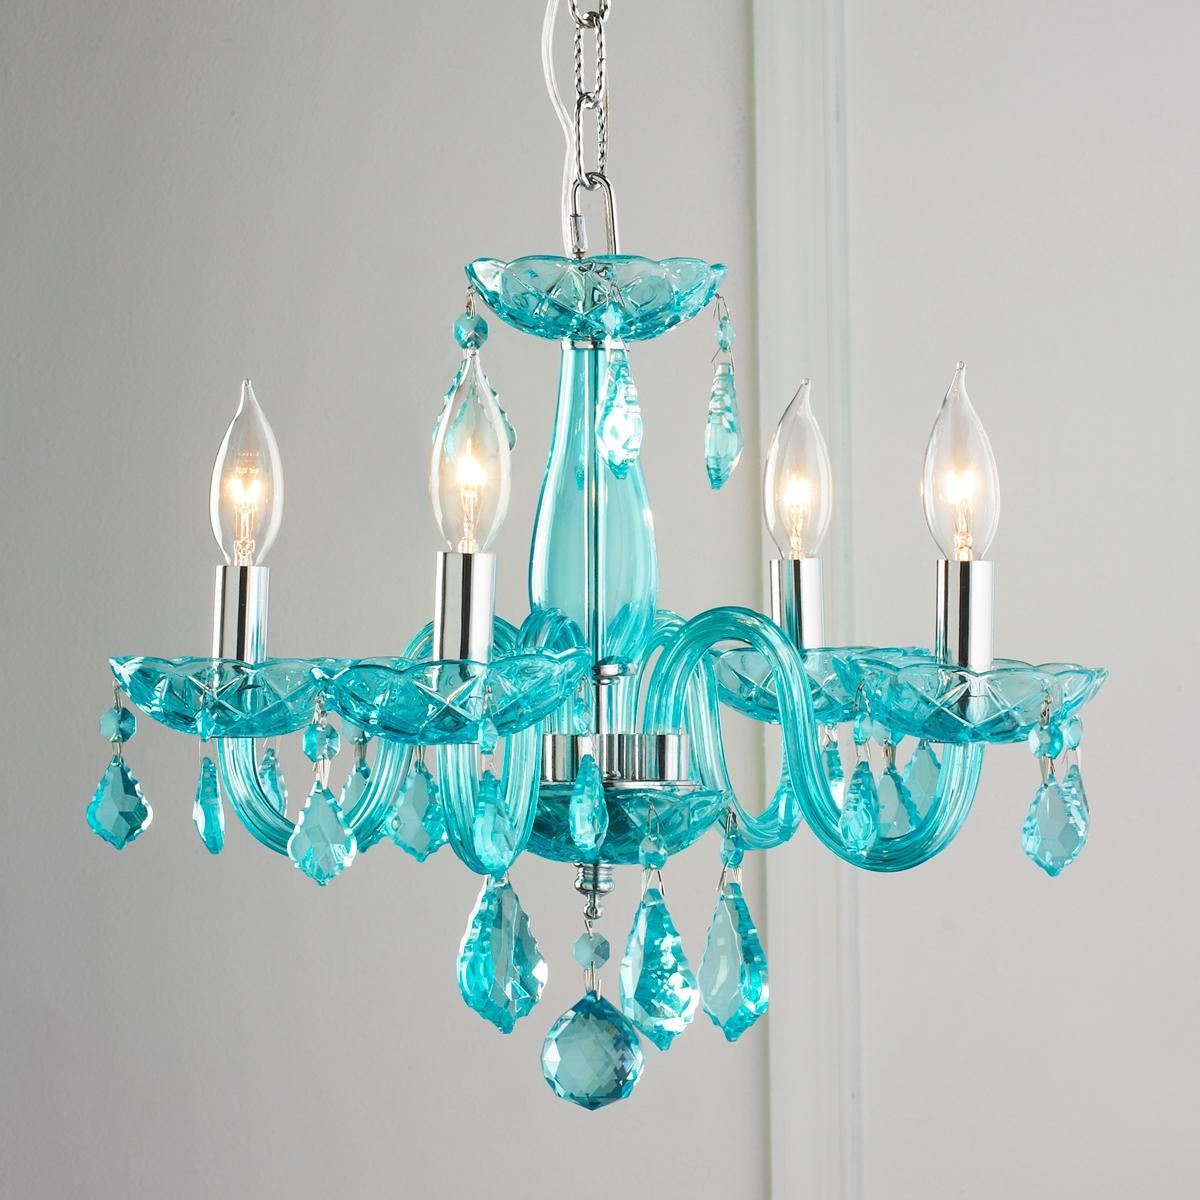 Color Crystal Mini Chandelier Mini Chandelier Ceiling Canopy Pertaining To Turquoise Blue Glass Chandeliers (View 4 of 25)